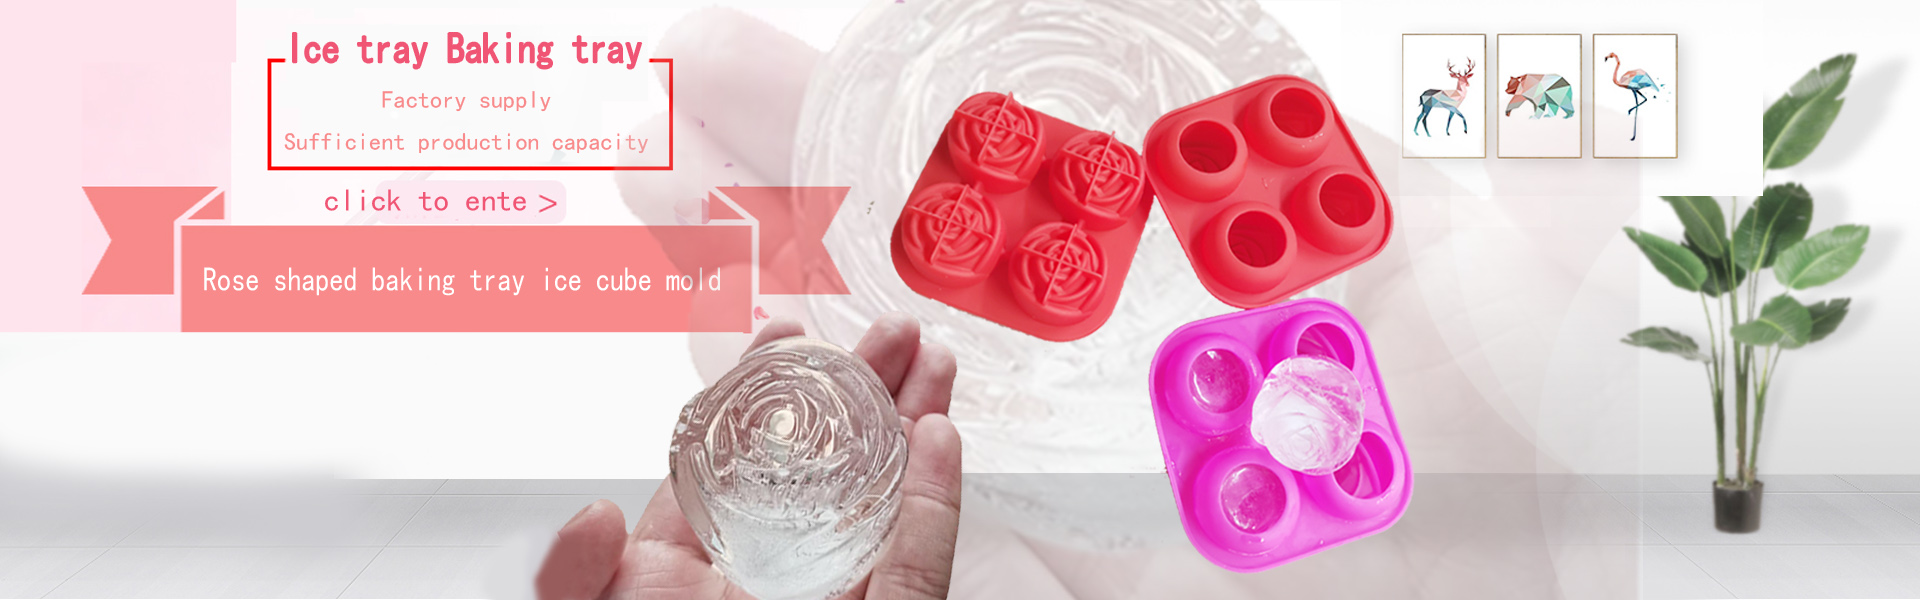 silicone toys,silicone household products,silicone mold manufacturing,Dongguan Minsi Silicone Products Co.